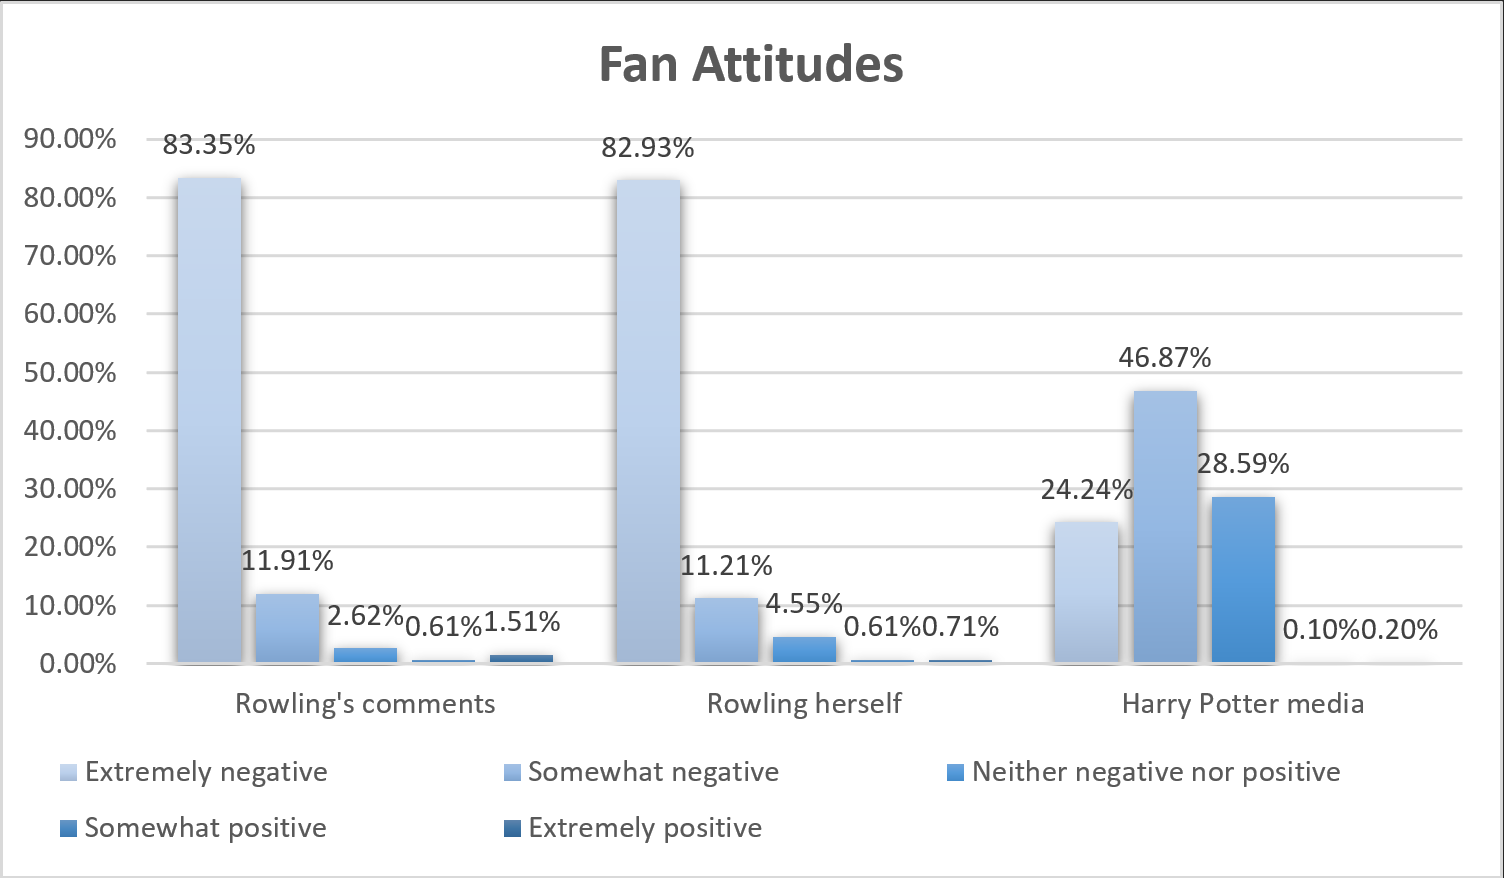 Approximately 83 percent of respondents feel extremely negative about Rowling's comments; approximately 83 percent feel extremely negative about Rowling herself; and approximately 24 percent feel extremely negative about Harry Potter, approximately 47 percent feel somewhat negative, and approximately 29 percent feel neither negative nor positive.